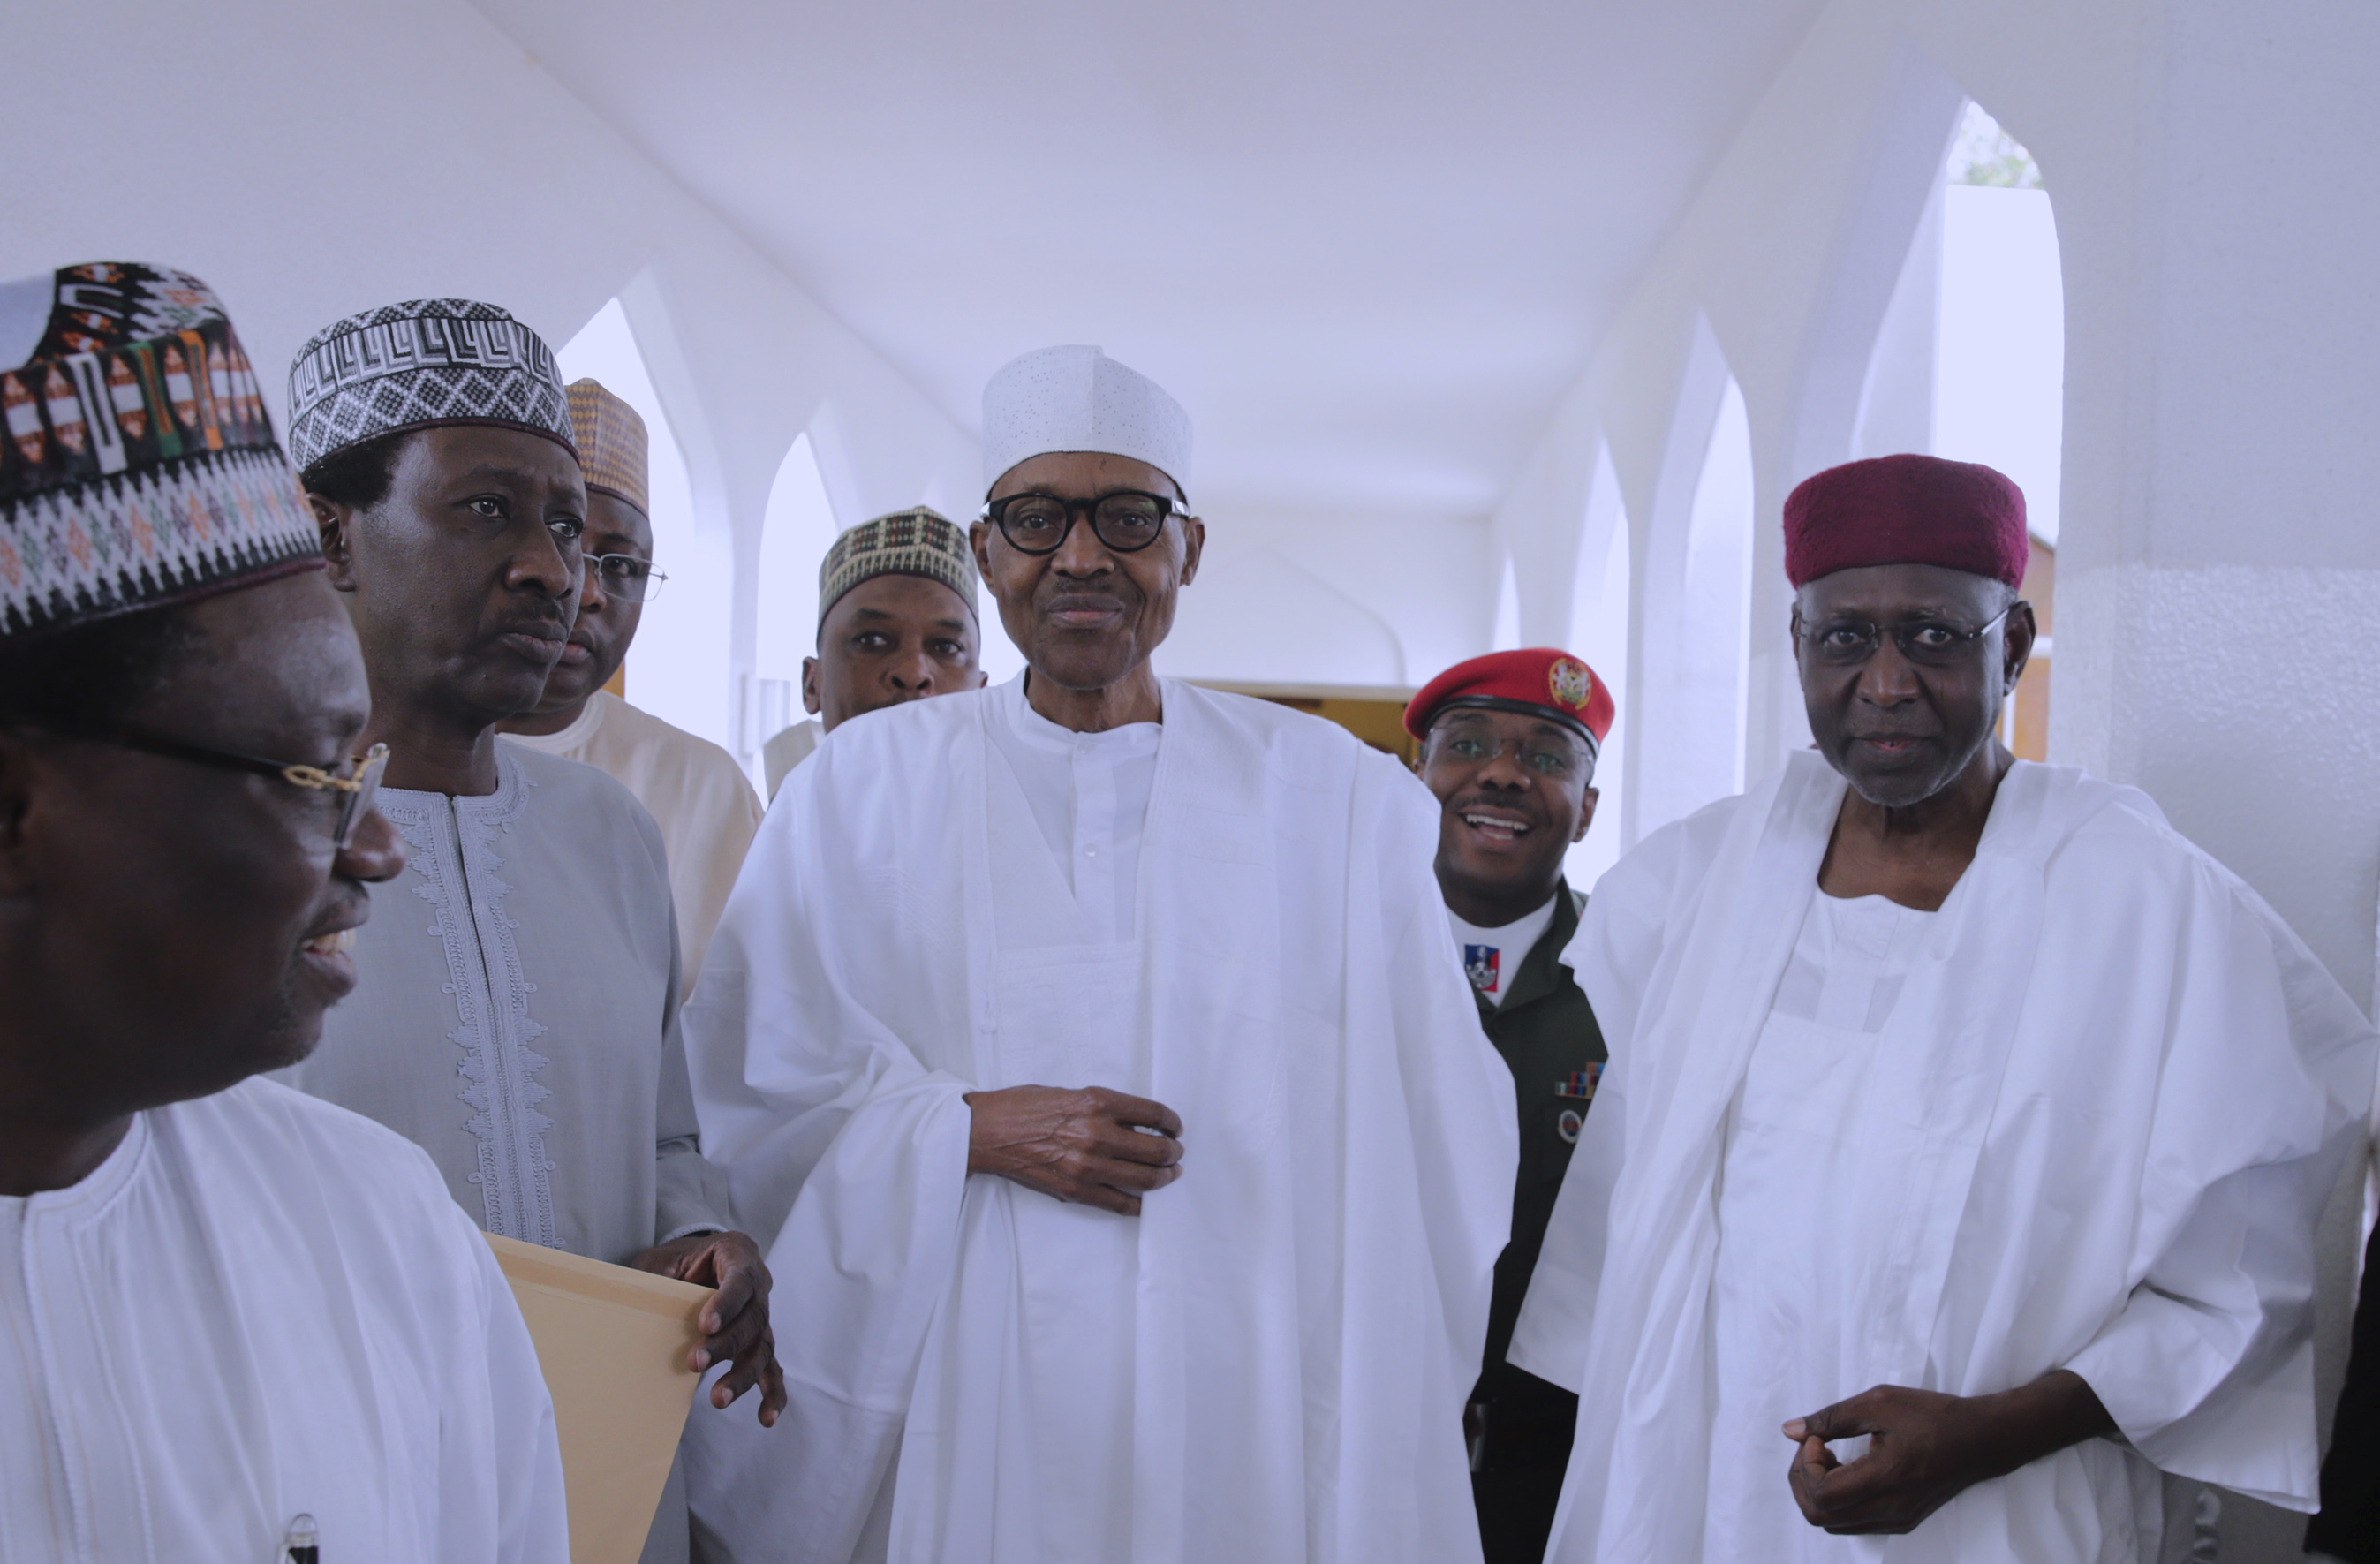 Nigeria's President Muhammadu Buhari with government officials after Friday prayers at the presidential palace in Abuja, Nigeria on May 5, 2017. Nigeria's 74-year old president has emerged to attend Friday prayers after missing a number of public engagements and three straight weekly cabinet meetings because of poor health. (Sunday Aghaeze—Nigeria State House/AP)